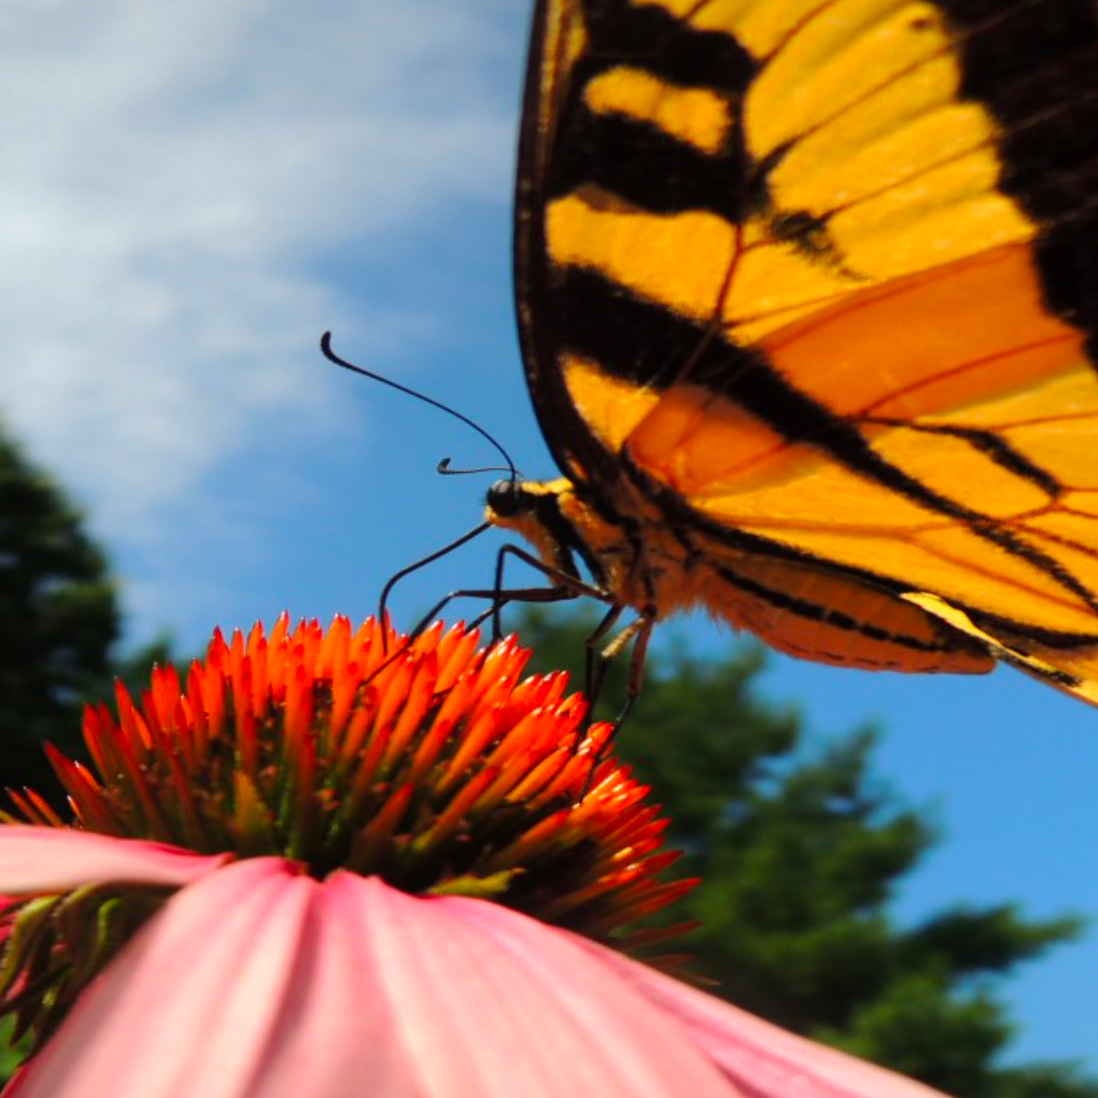 Closeup of a yellow and black butterfly sitting on the bulb of a red flower with the sky in the background.